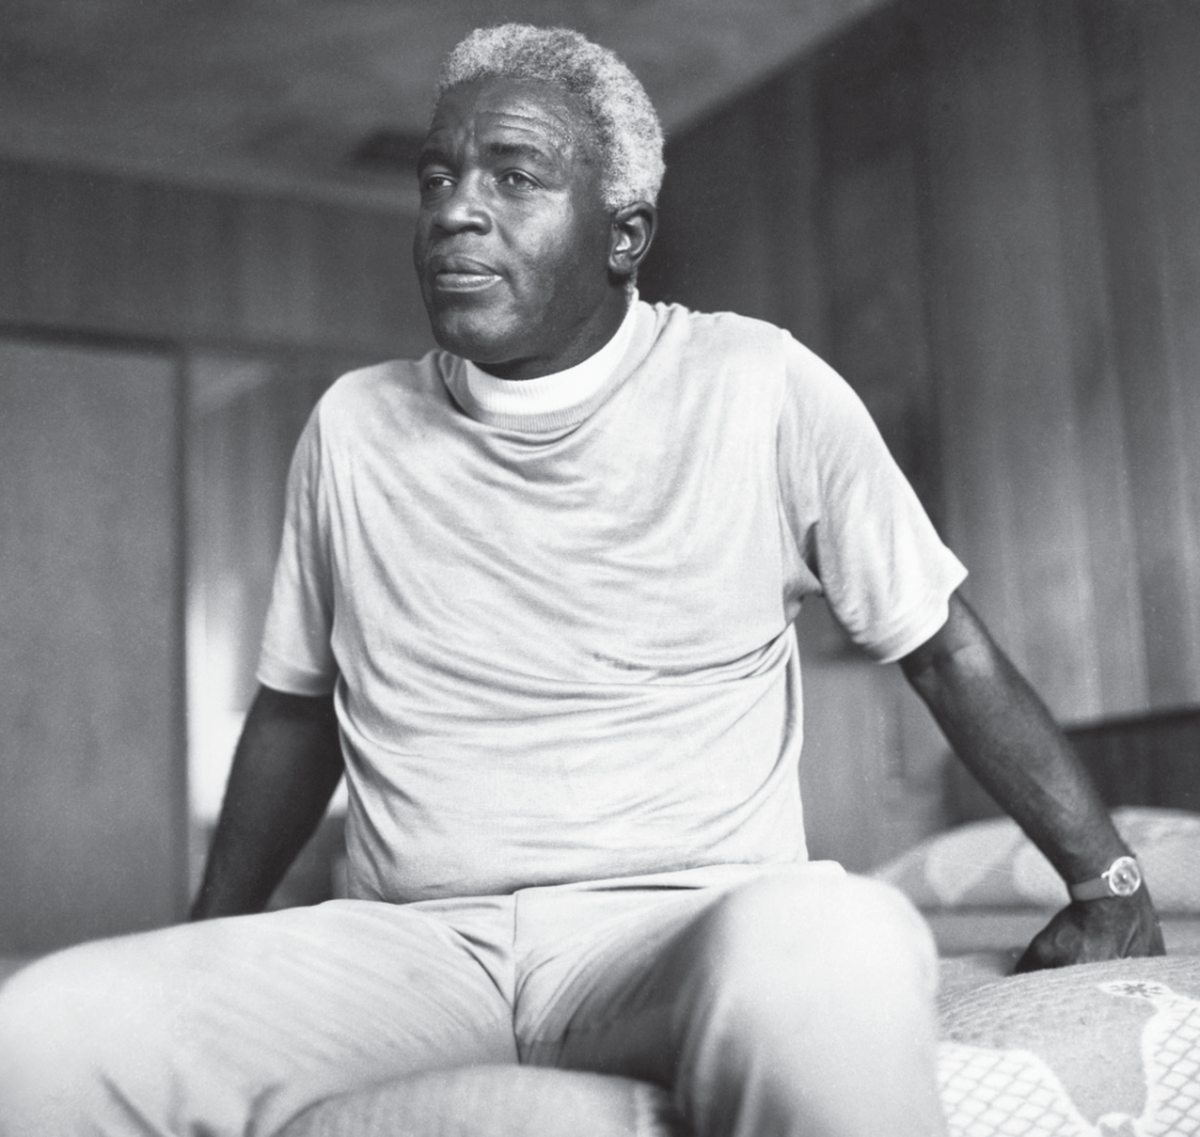 Jackie Robinson in 1971, a year before his death.